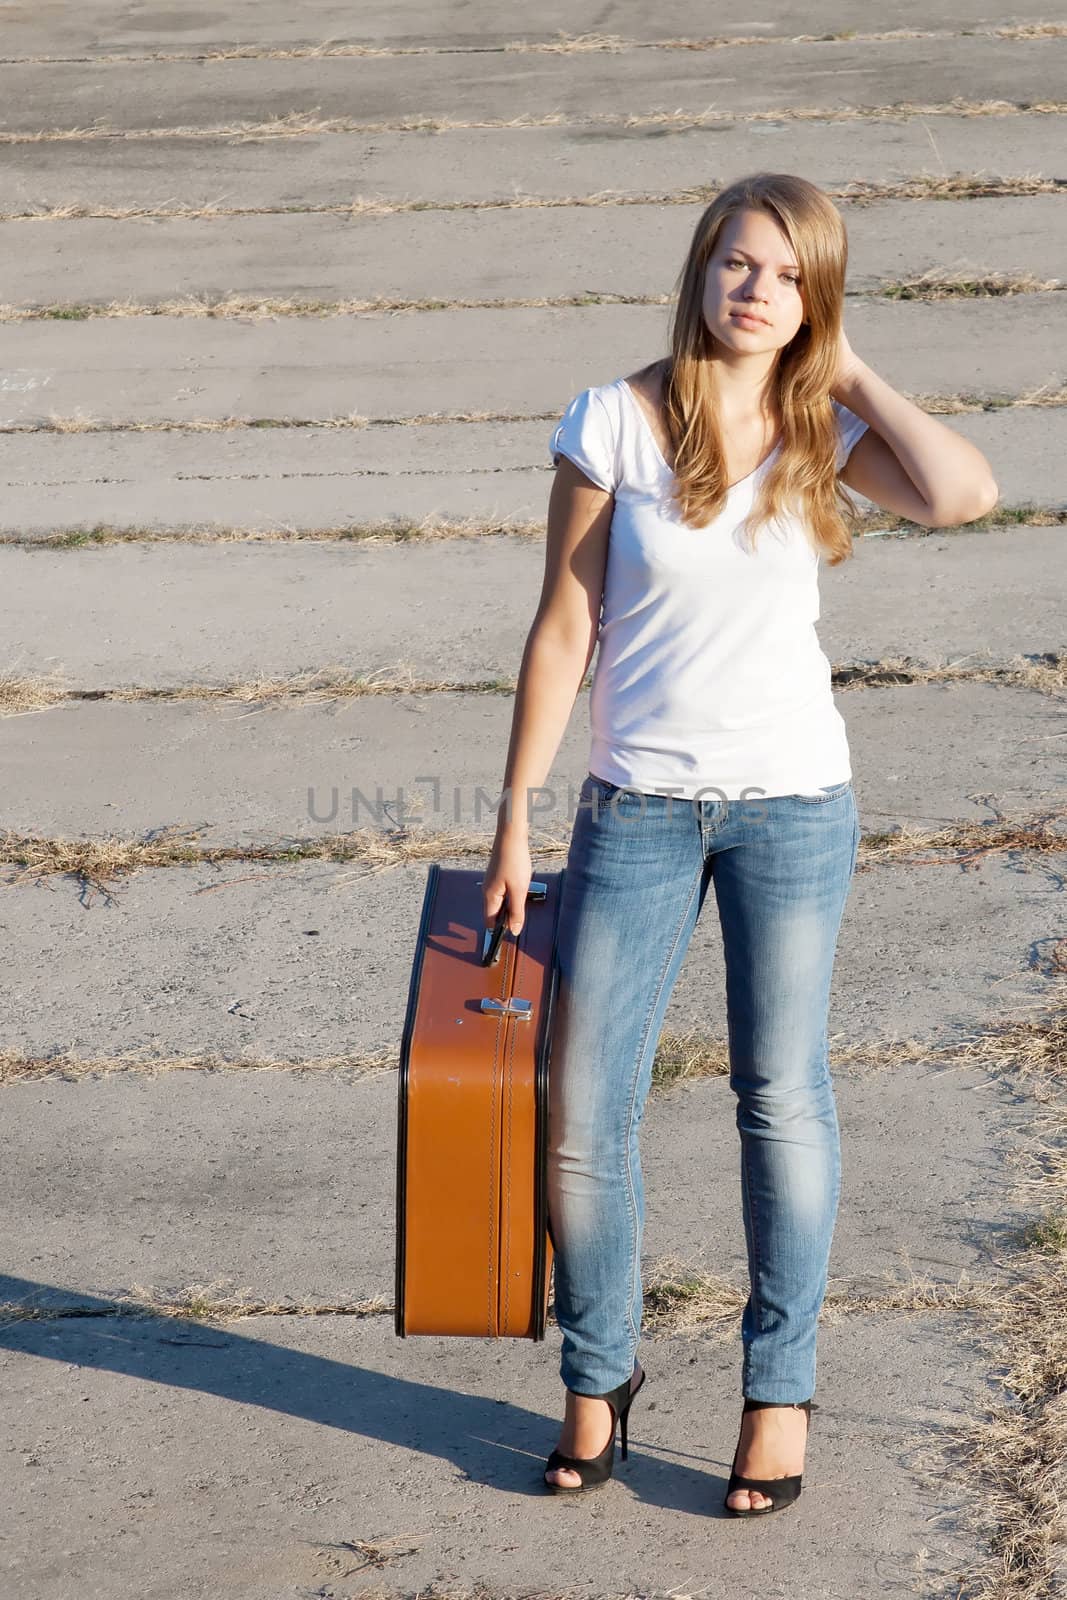 beautiful girl with a suitcase outdoors shooting